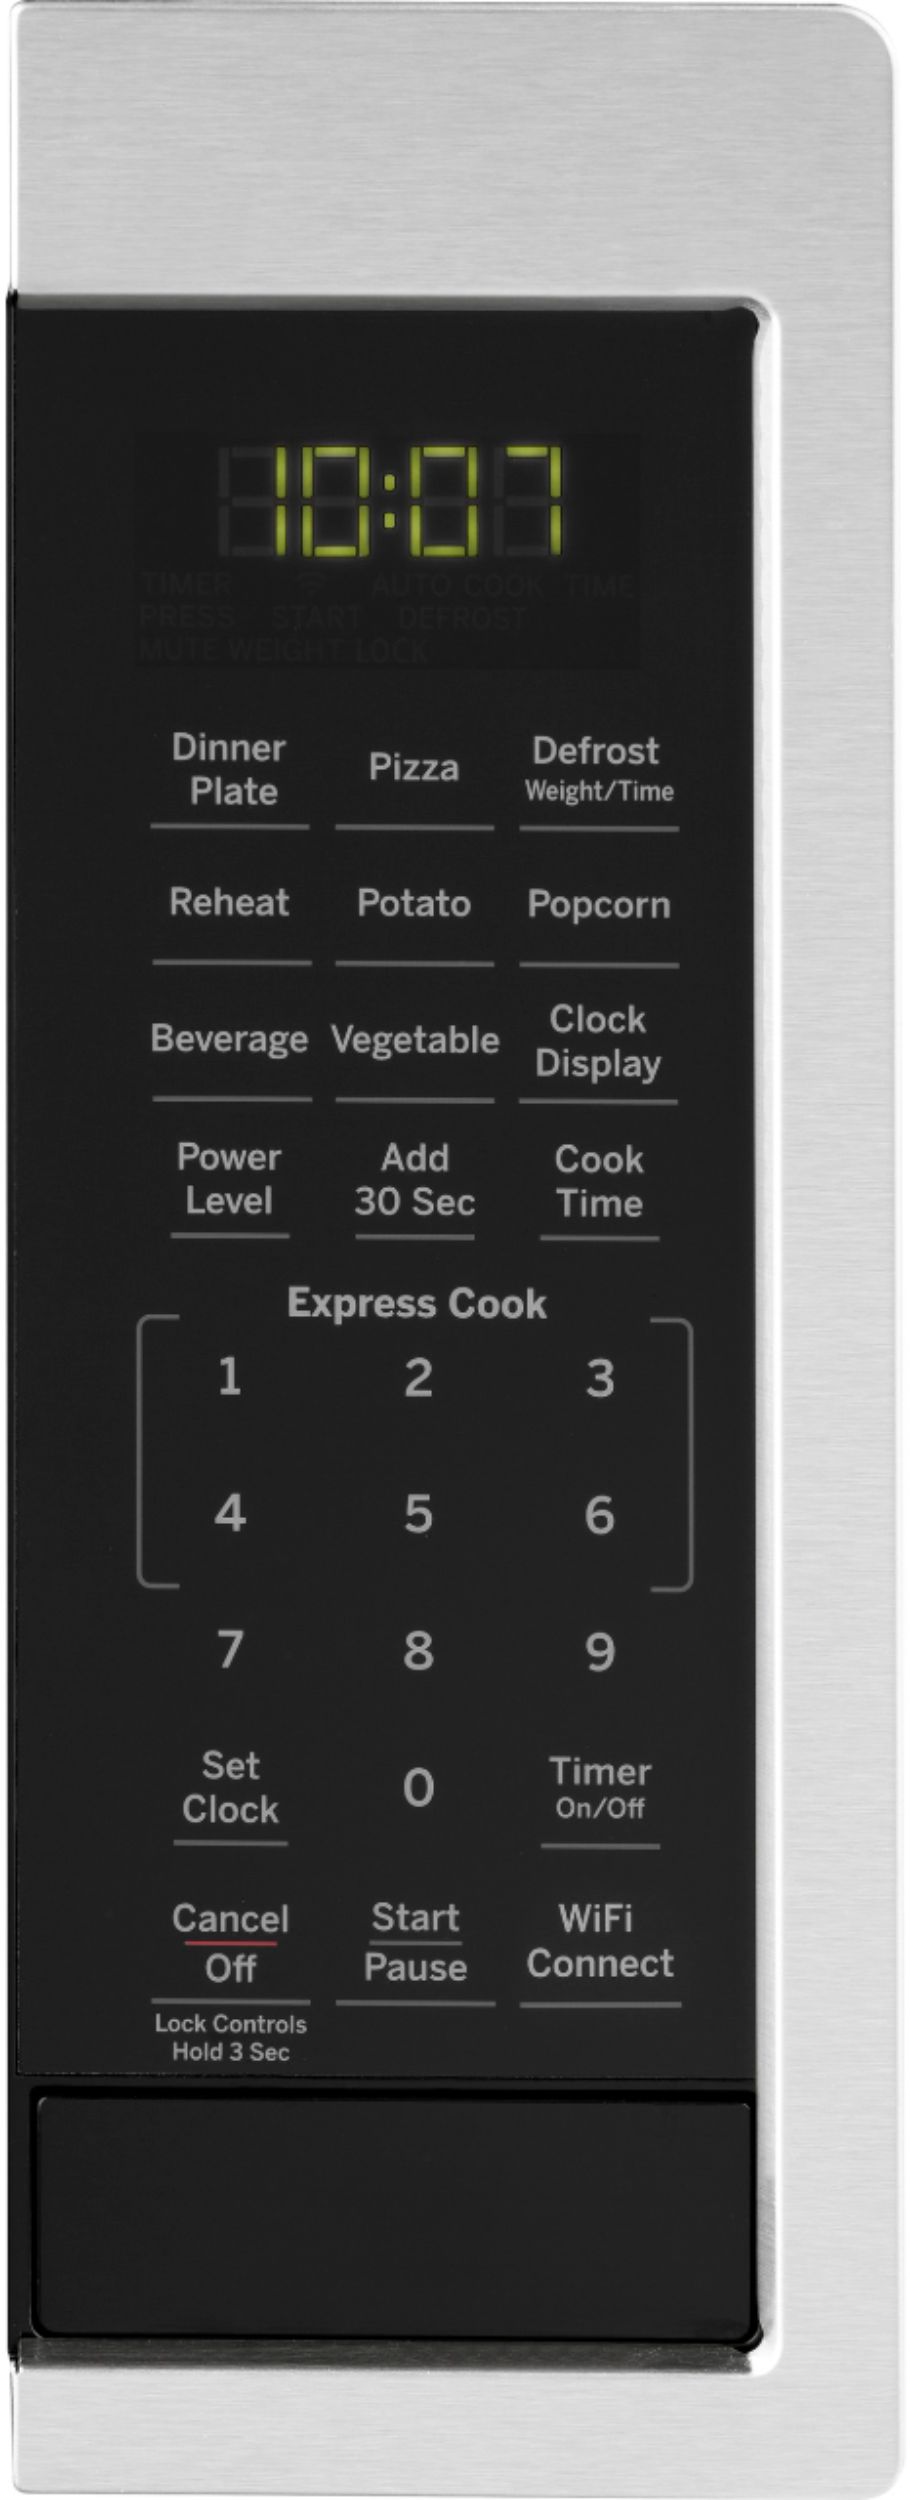 GE - 0.9 Cu. Ft. Capacity Smart Countertop Microwave Oven with Scan-to-Cook Technology - Stainless Steel